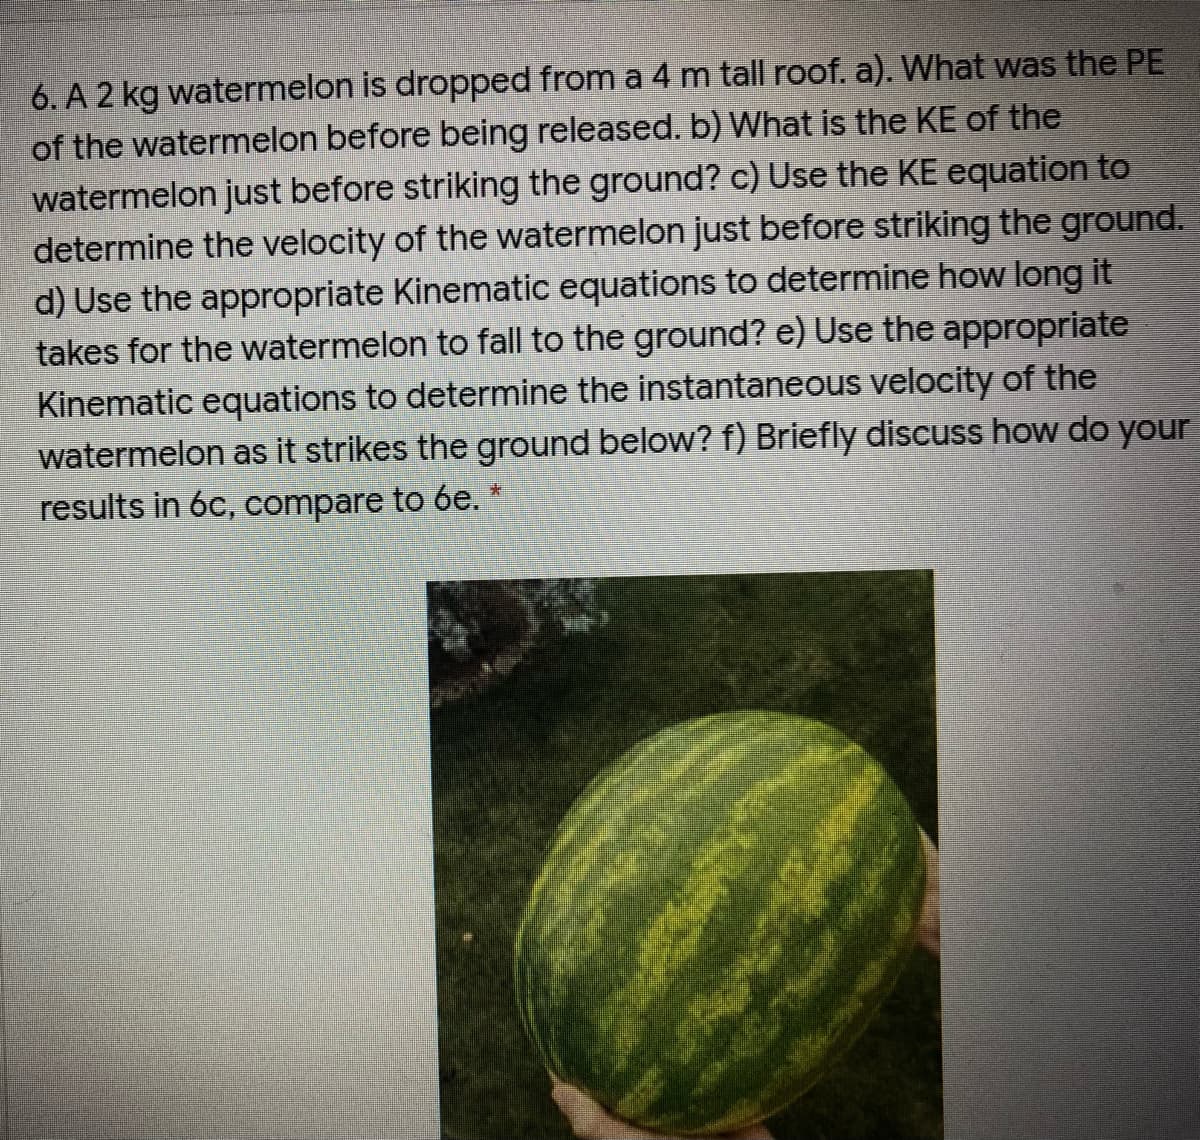 6. A 2 kg watermelon is dropped from a 4 m tall roof. a). What was the PE
of the watermelon before being released. b) What is the KE of the
watermelon just before striking the ground? c) Use the KE equation to
determine the velocity of the watermelon just before striking the ground.
d) Use the appropriate Kinematic equations to determine how long it
takes for the watermelon to fall to the ground? e) Use the appropriate
Kinematic equations to determine the instantaneous velocity of the
watermelon as it strikes the ground below? f) Briefly discuss how do your
results in 6c, compare to 6e. *
